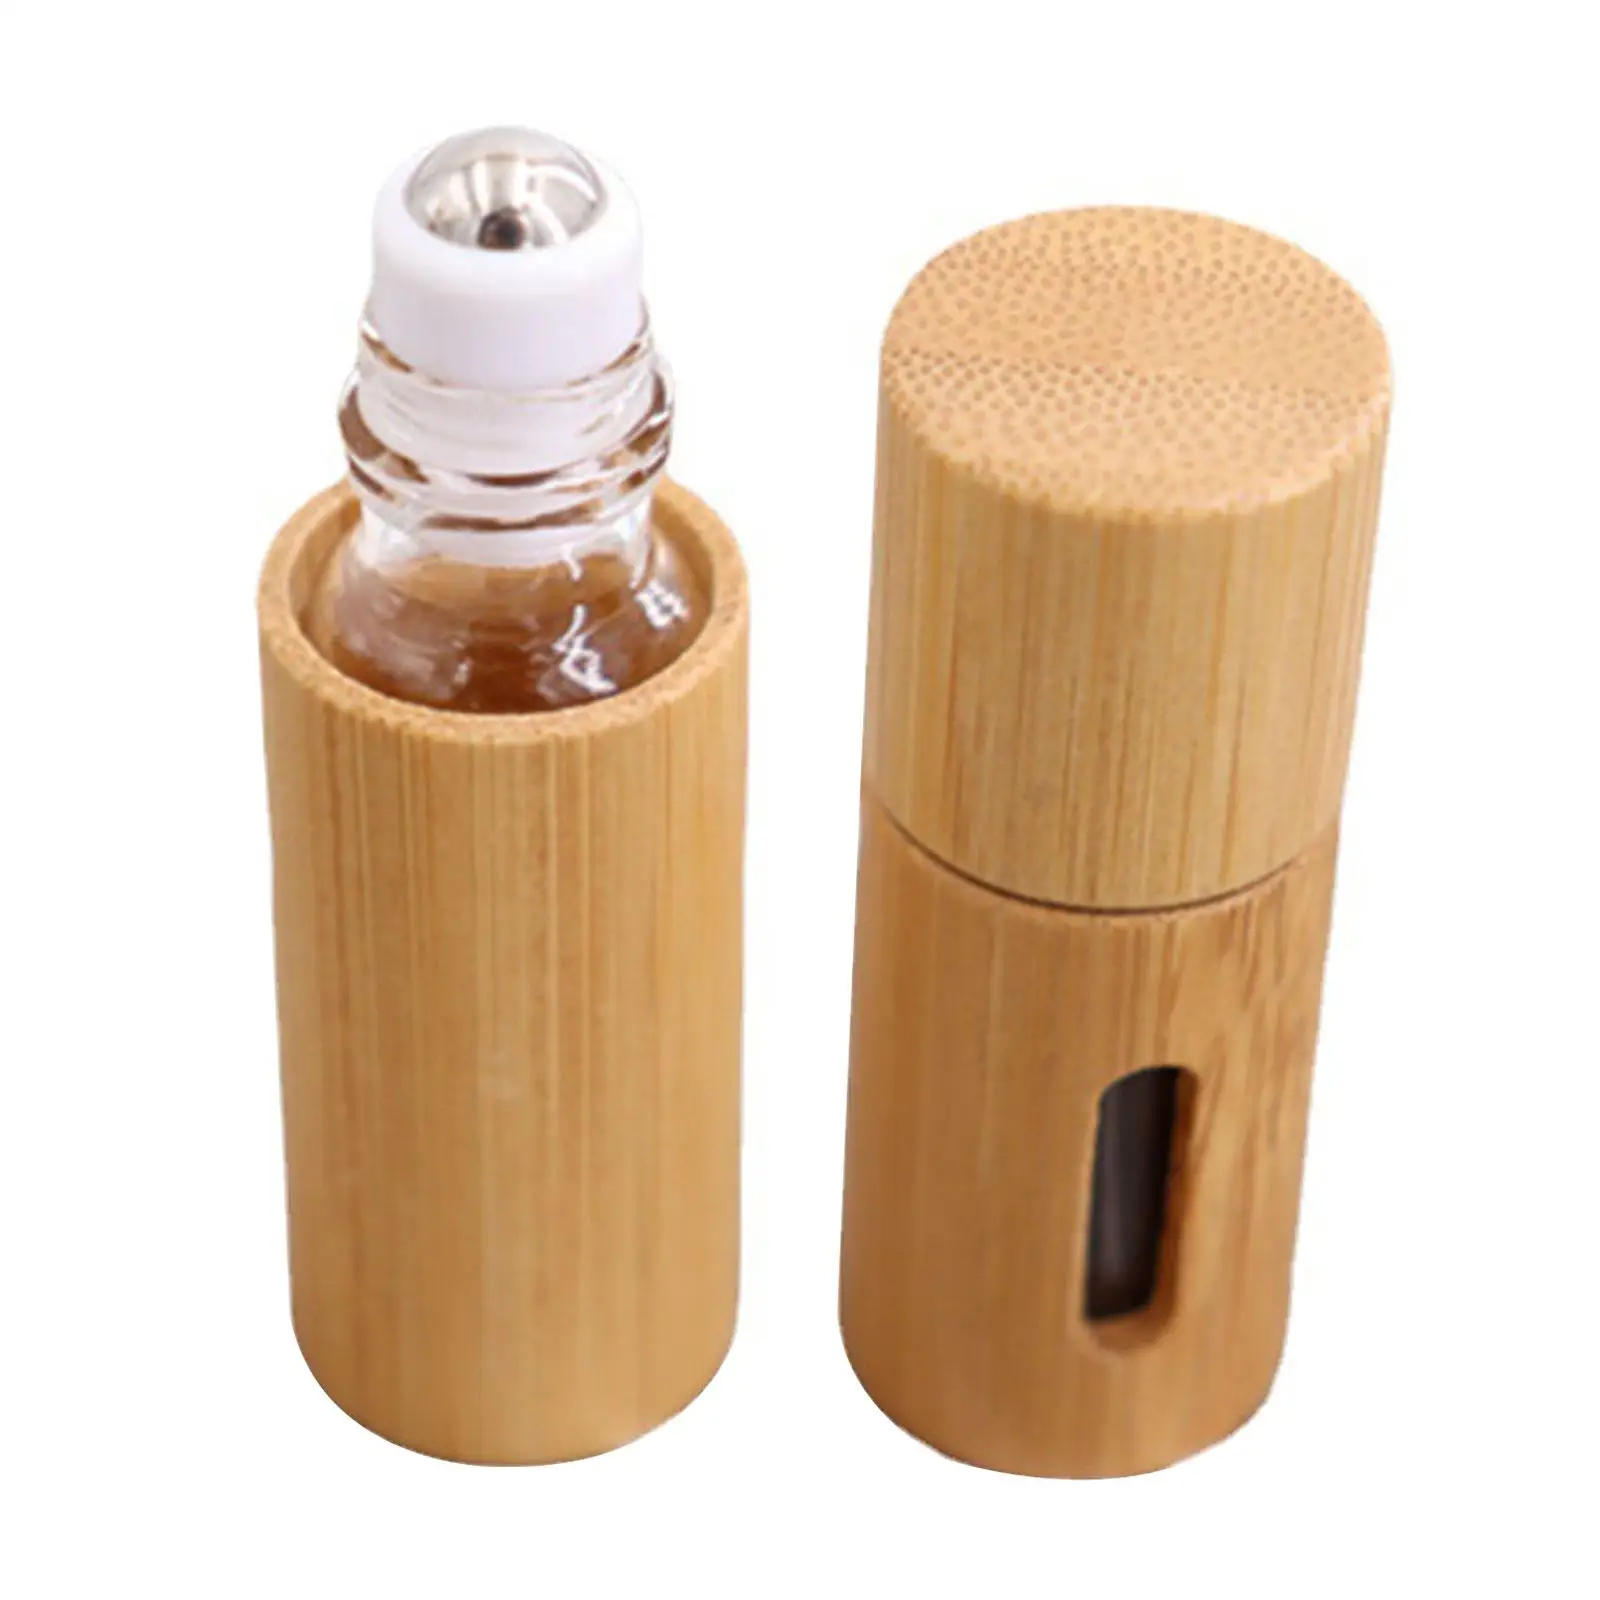 2Pcs Essential Oil Containers Bottle Holder for Traveling and Easily Fits in Your Purse Roller Ball Bottles Rollerball Bottle